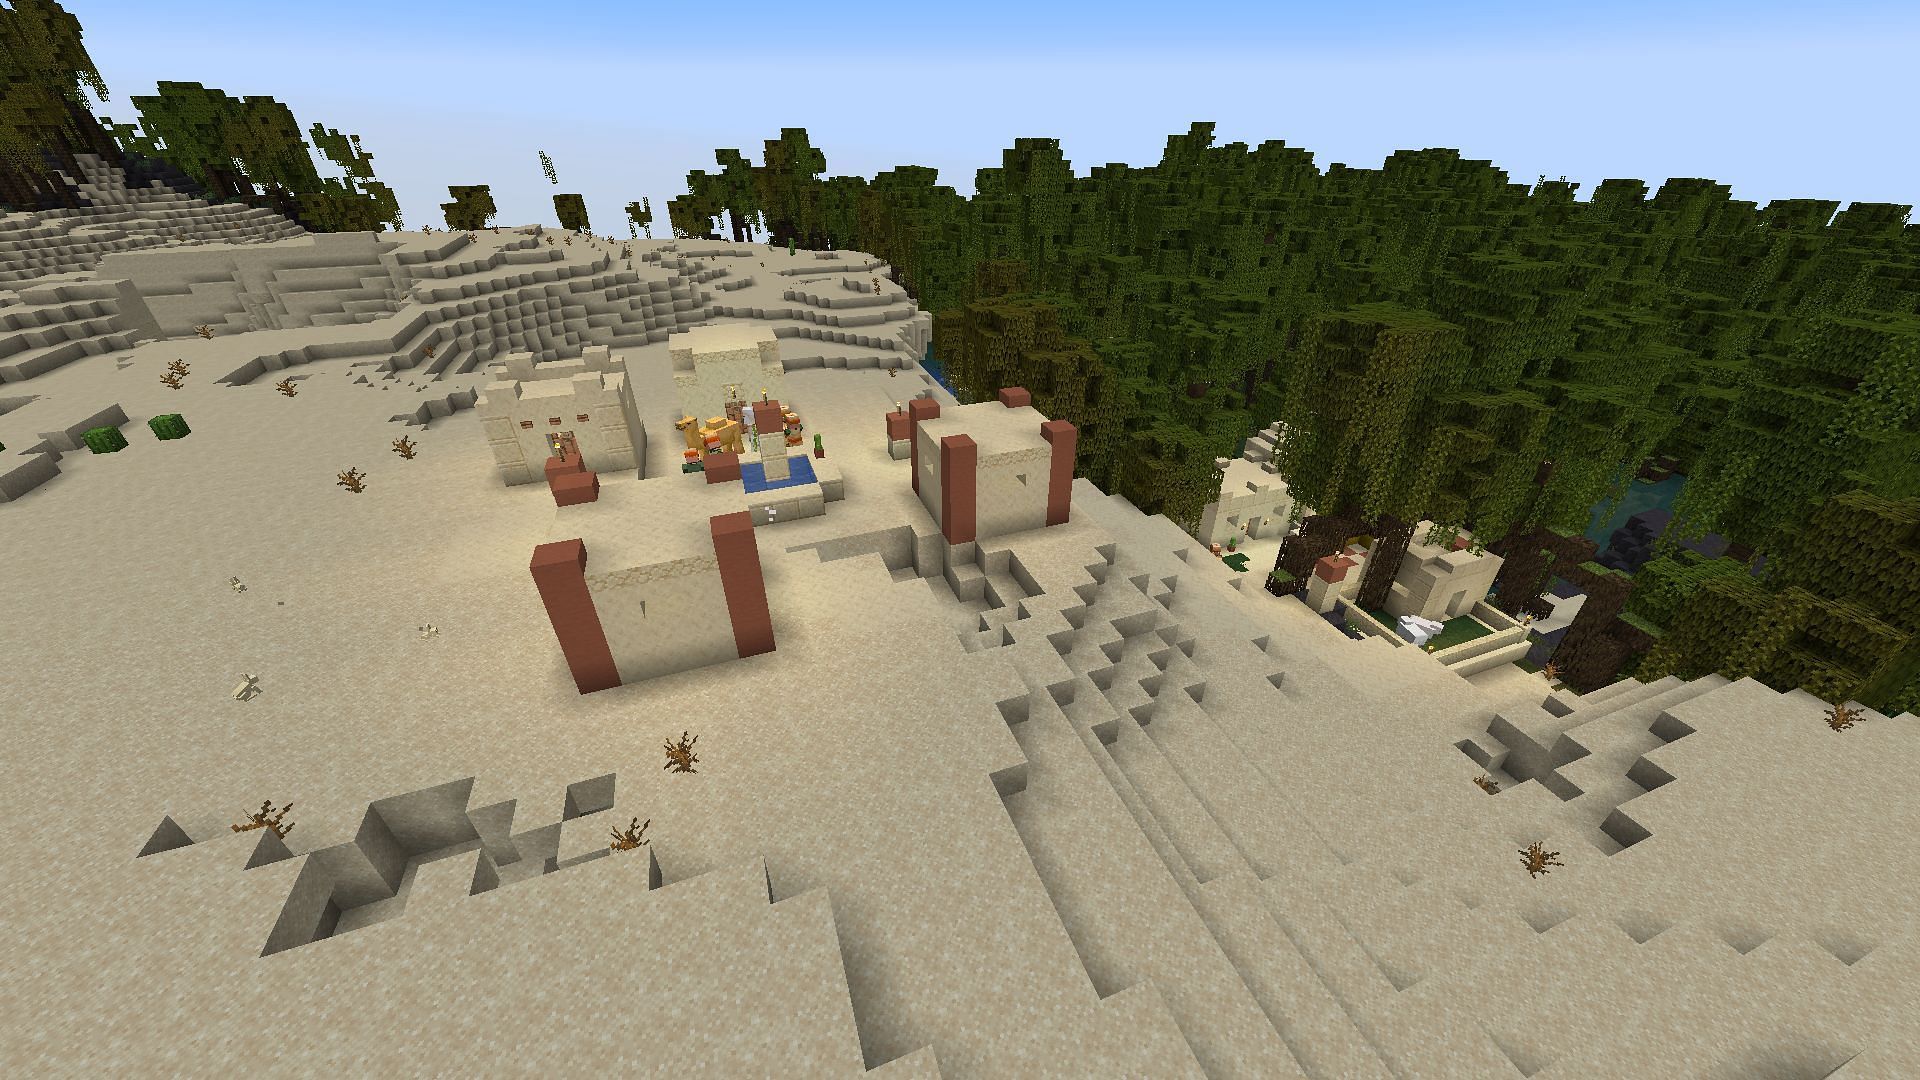 A cozy desert village rests inside a swamp biome in this Minecraft seed (Image via Mojang)